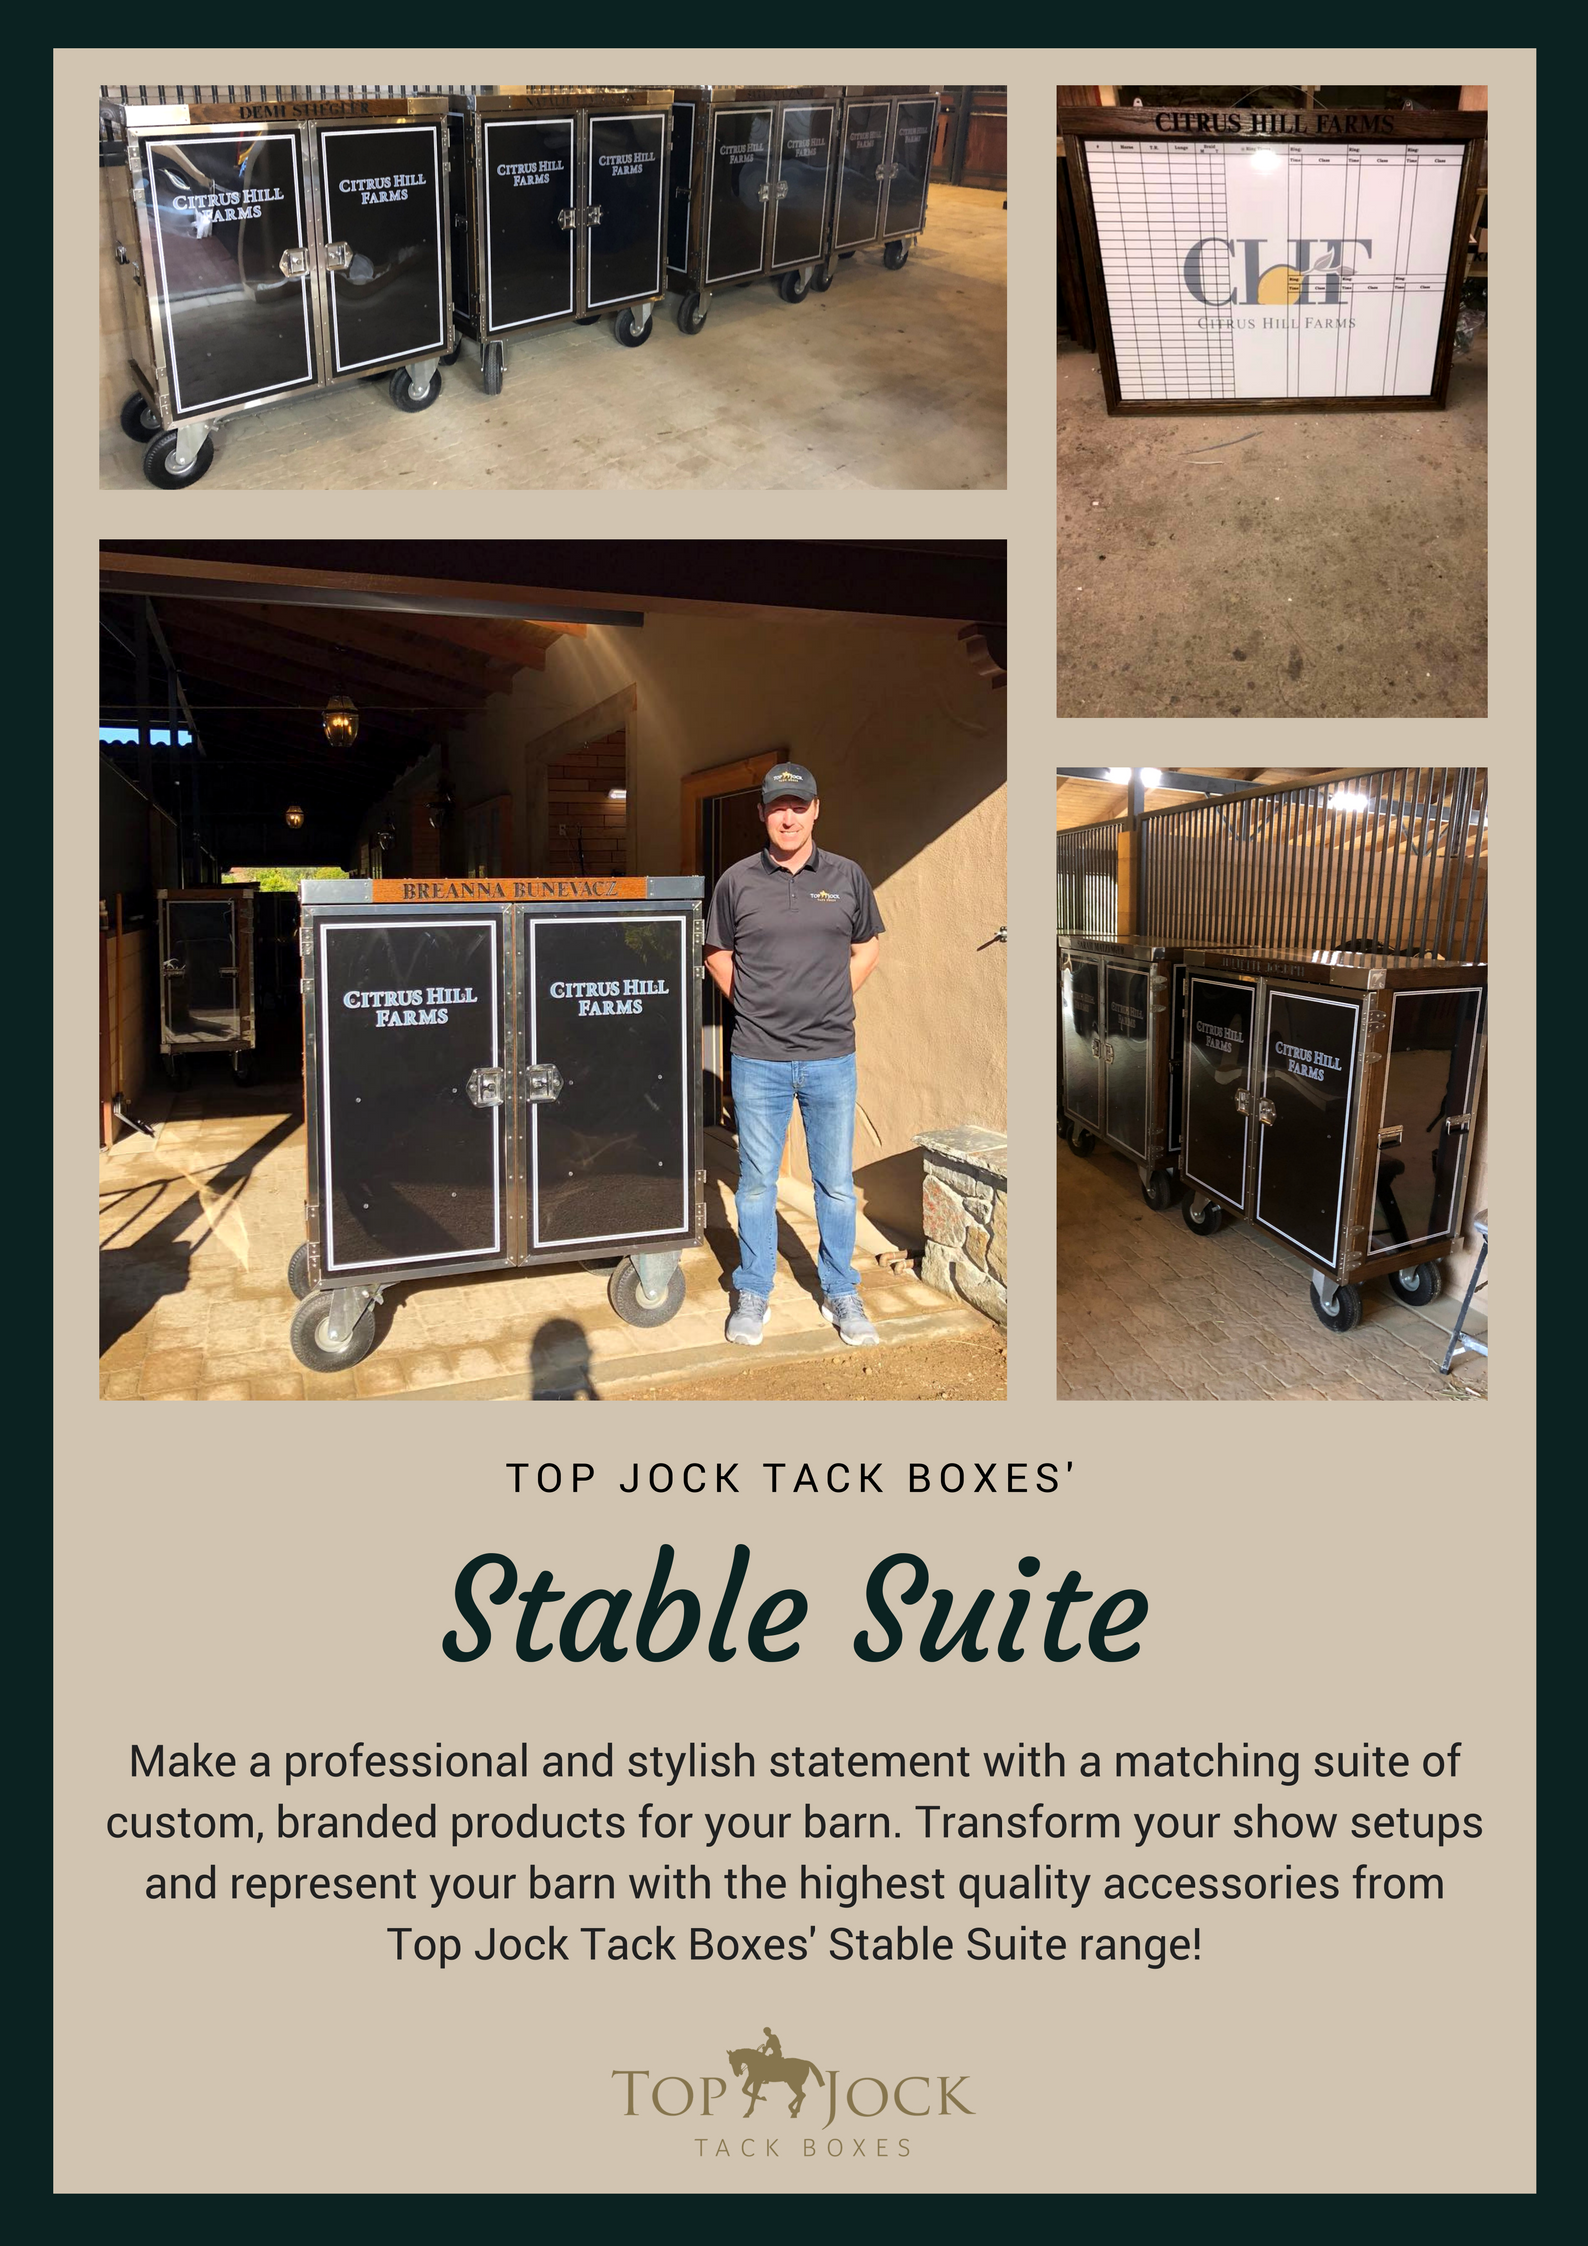 Step up Your Show Setup with Top Jock Tack Boxes' Stable Suite Range